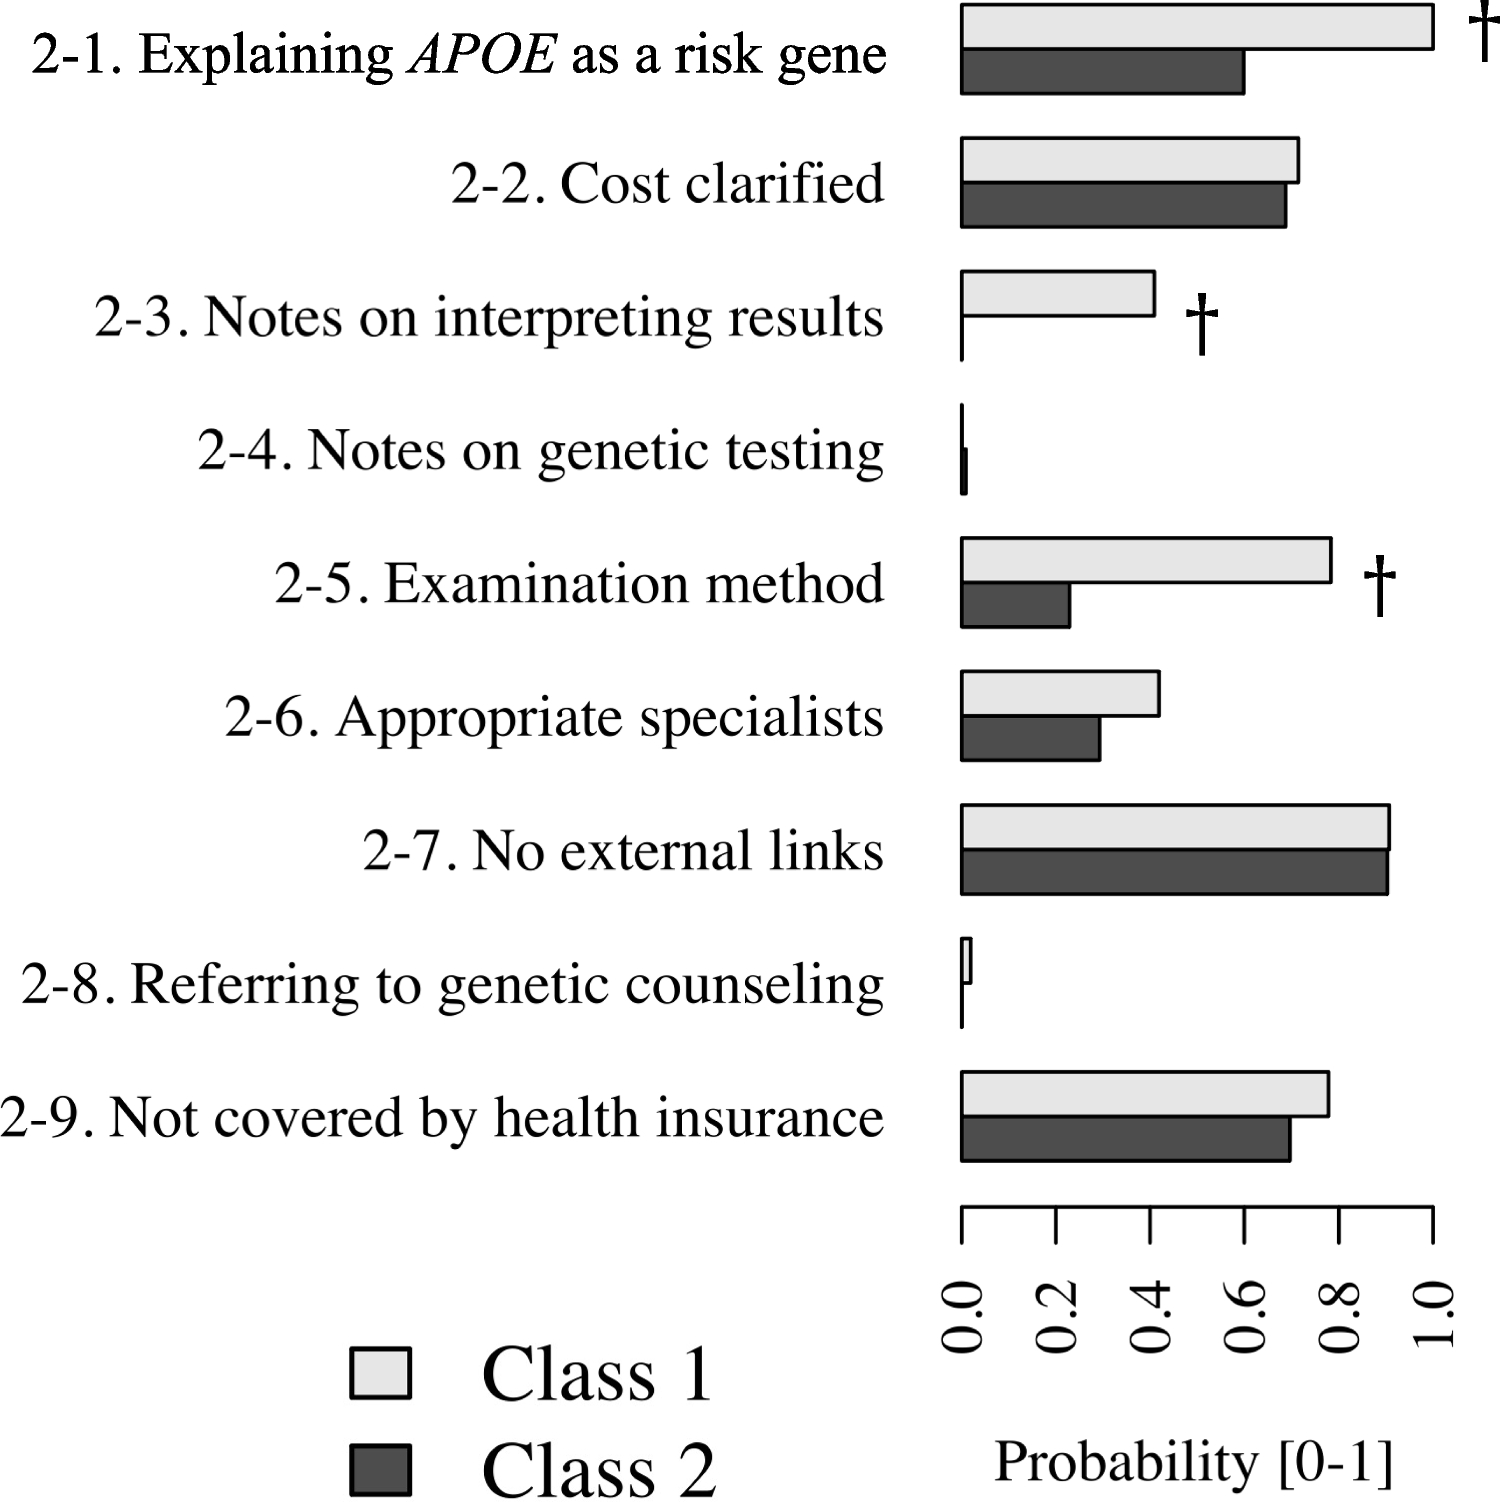 Advertisement by medical facilities as an opportunity route of APOE genetic testing in Japan: a website analysis